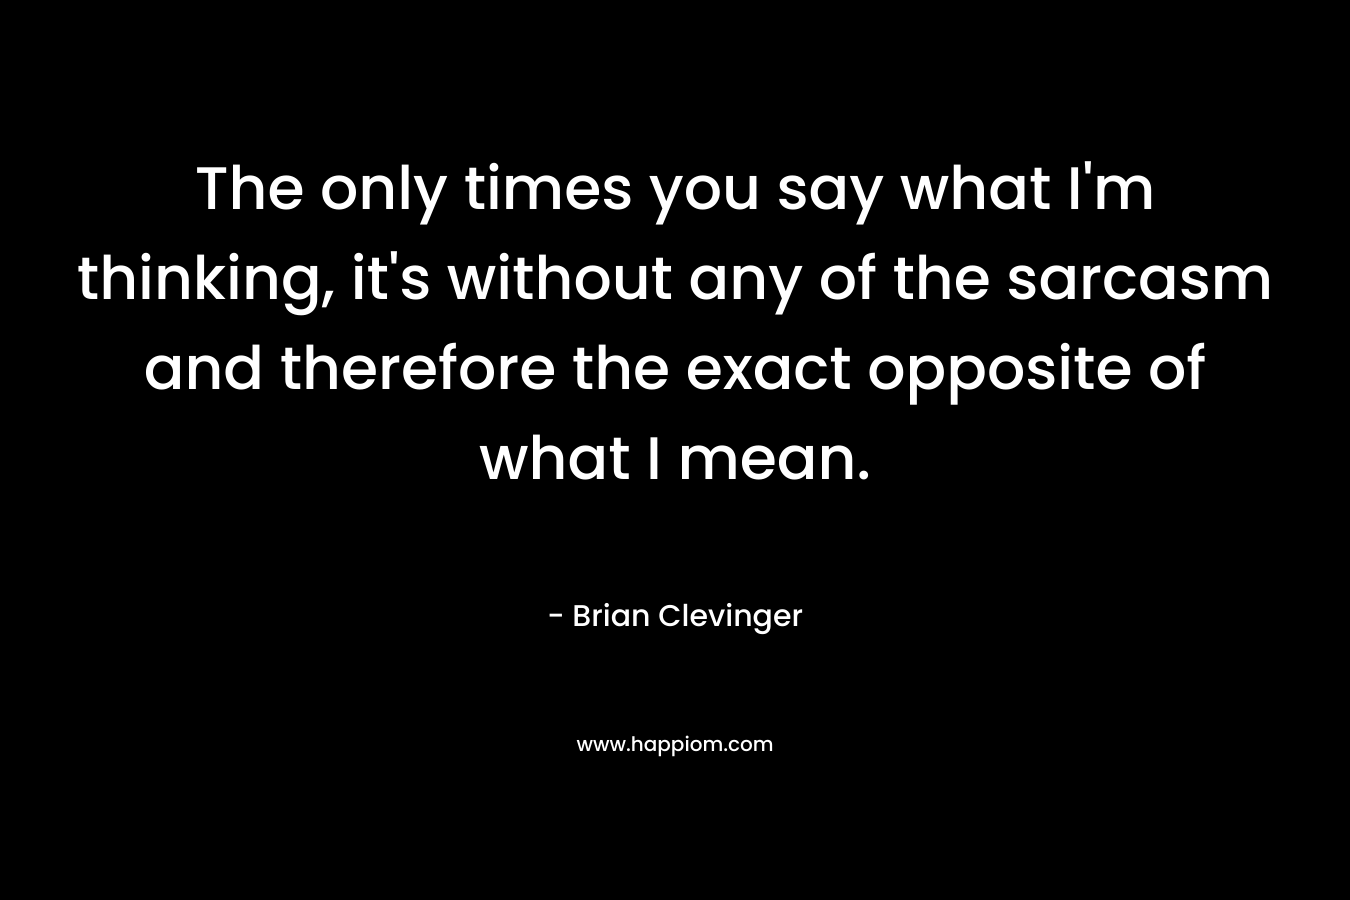 The only times you say what I’m thinking, it’s without any of the sarcasm and therefore the exact opposite of what I mean. – Brian Clevinger